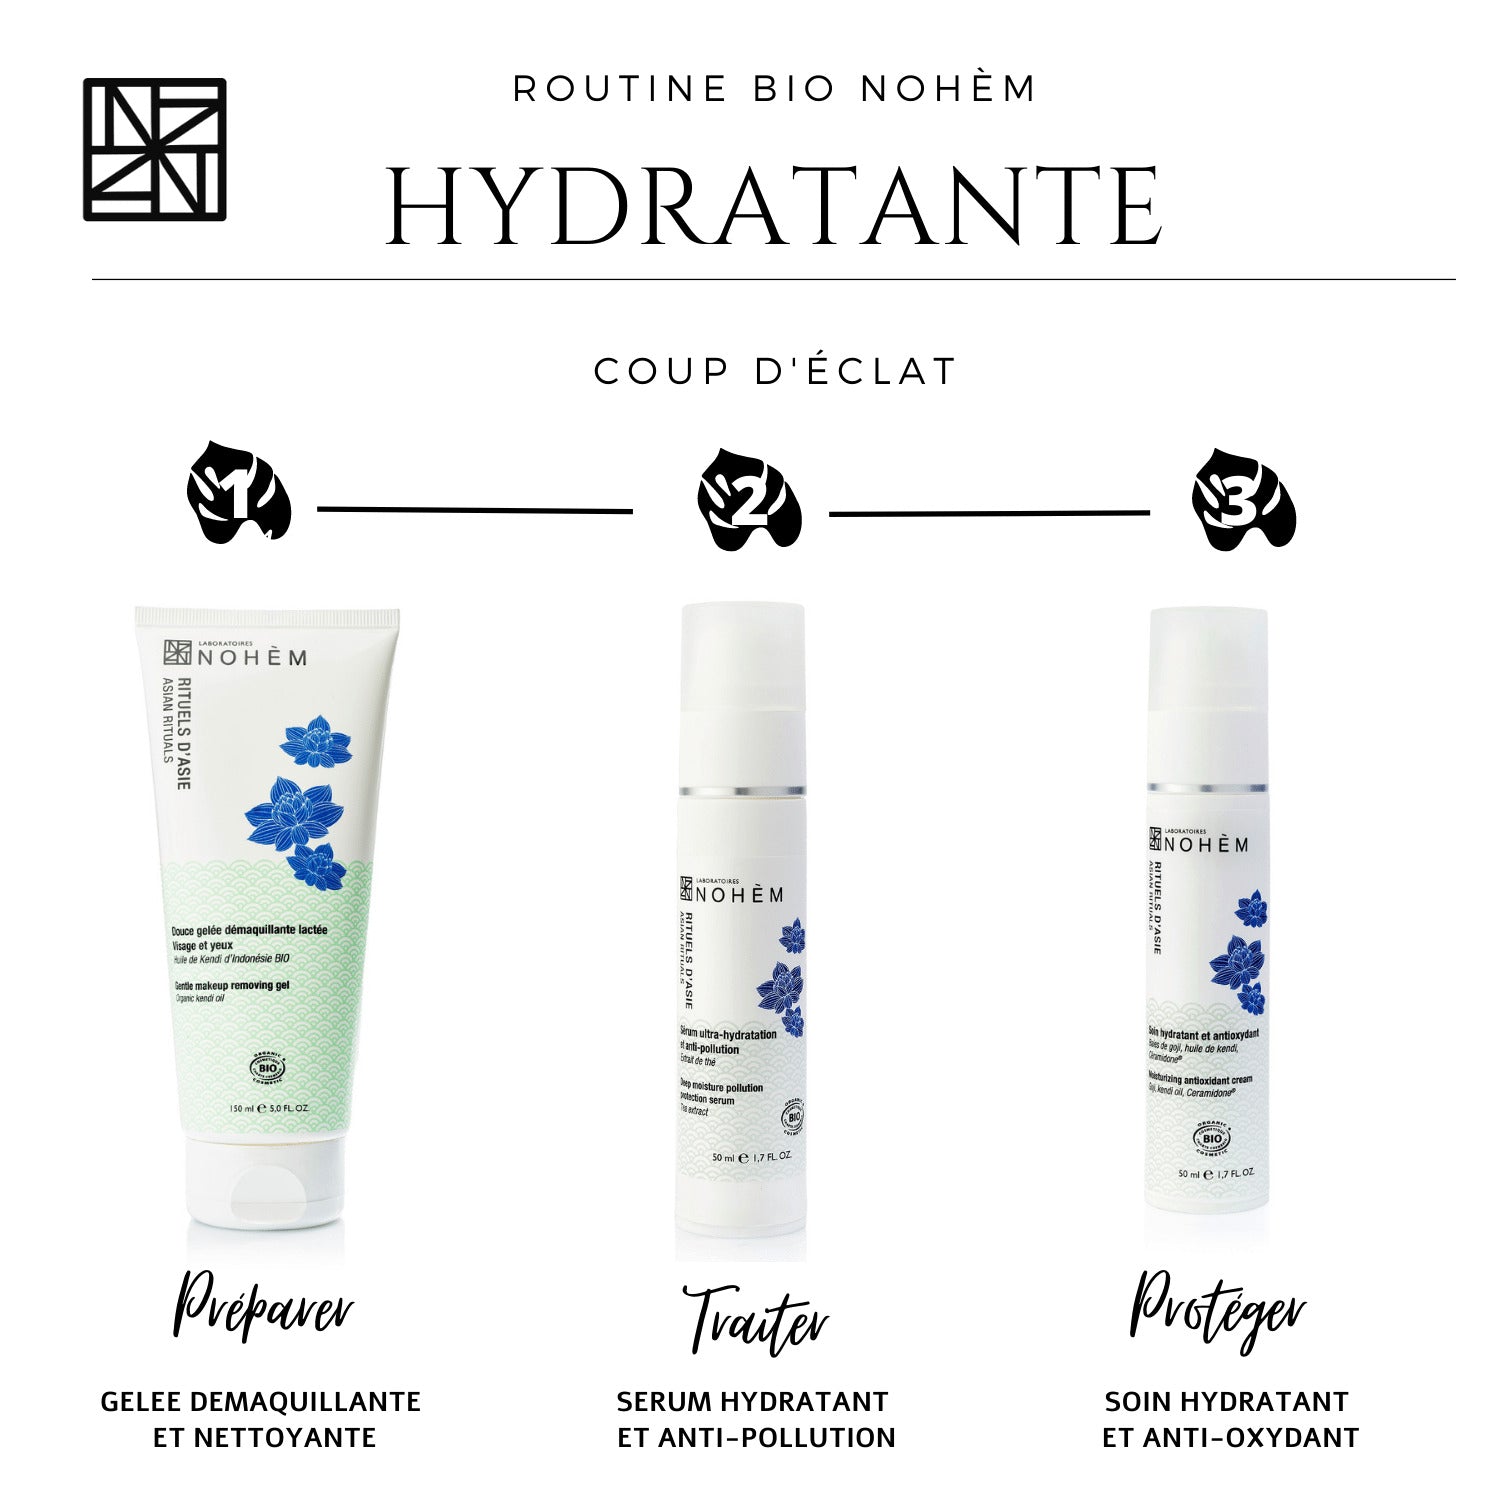 Ultra-hydrating and anti-pollution serum